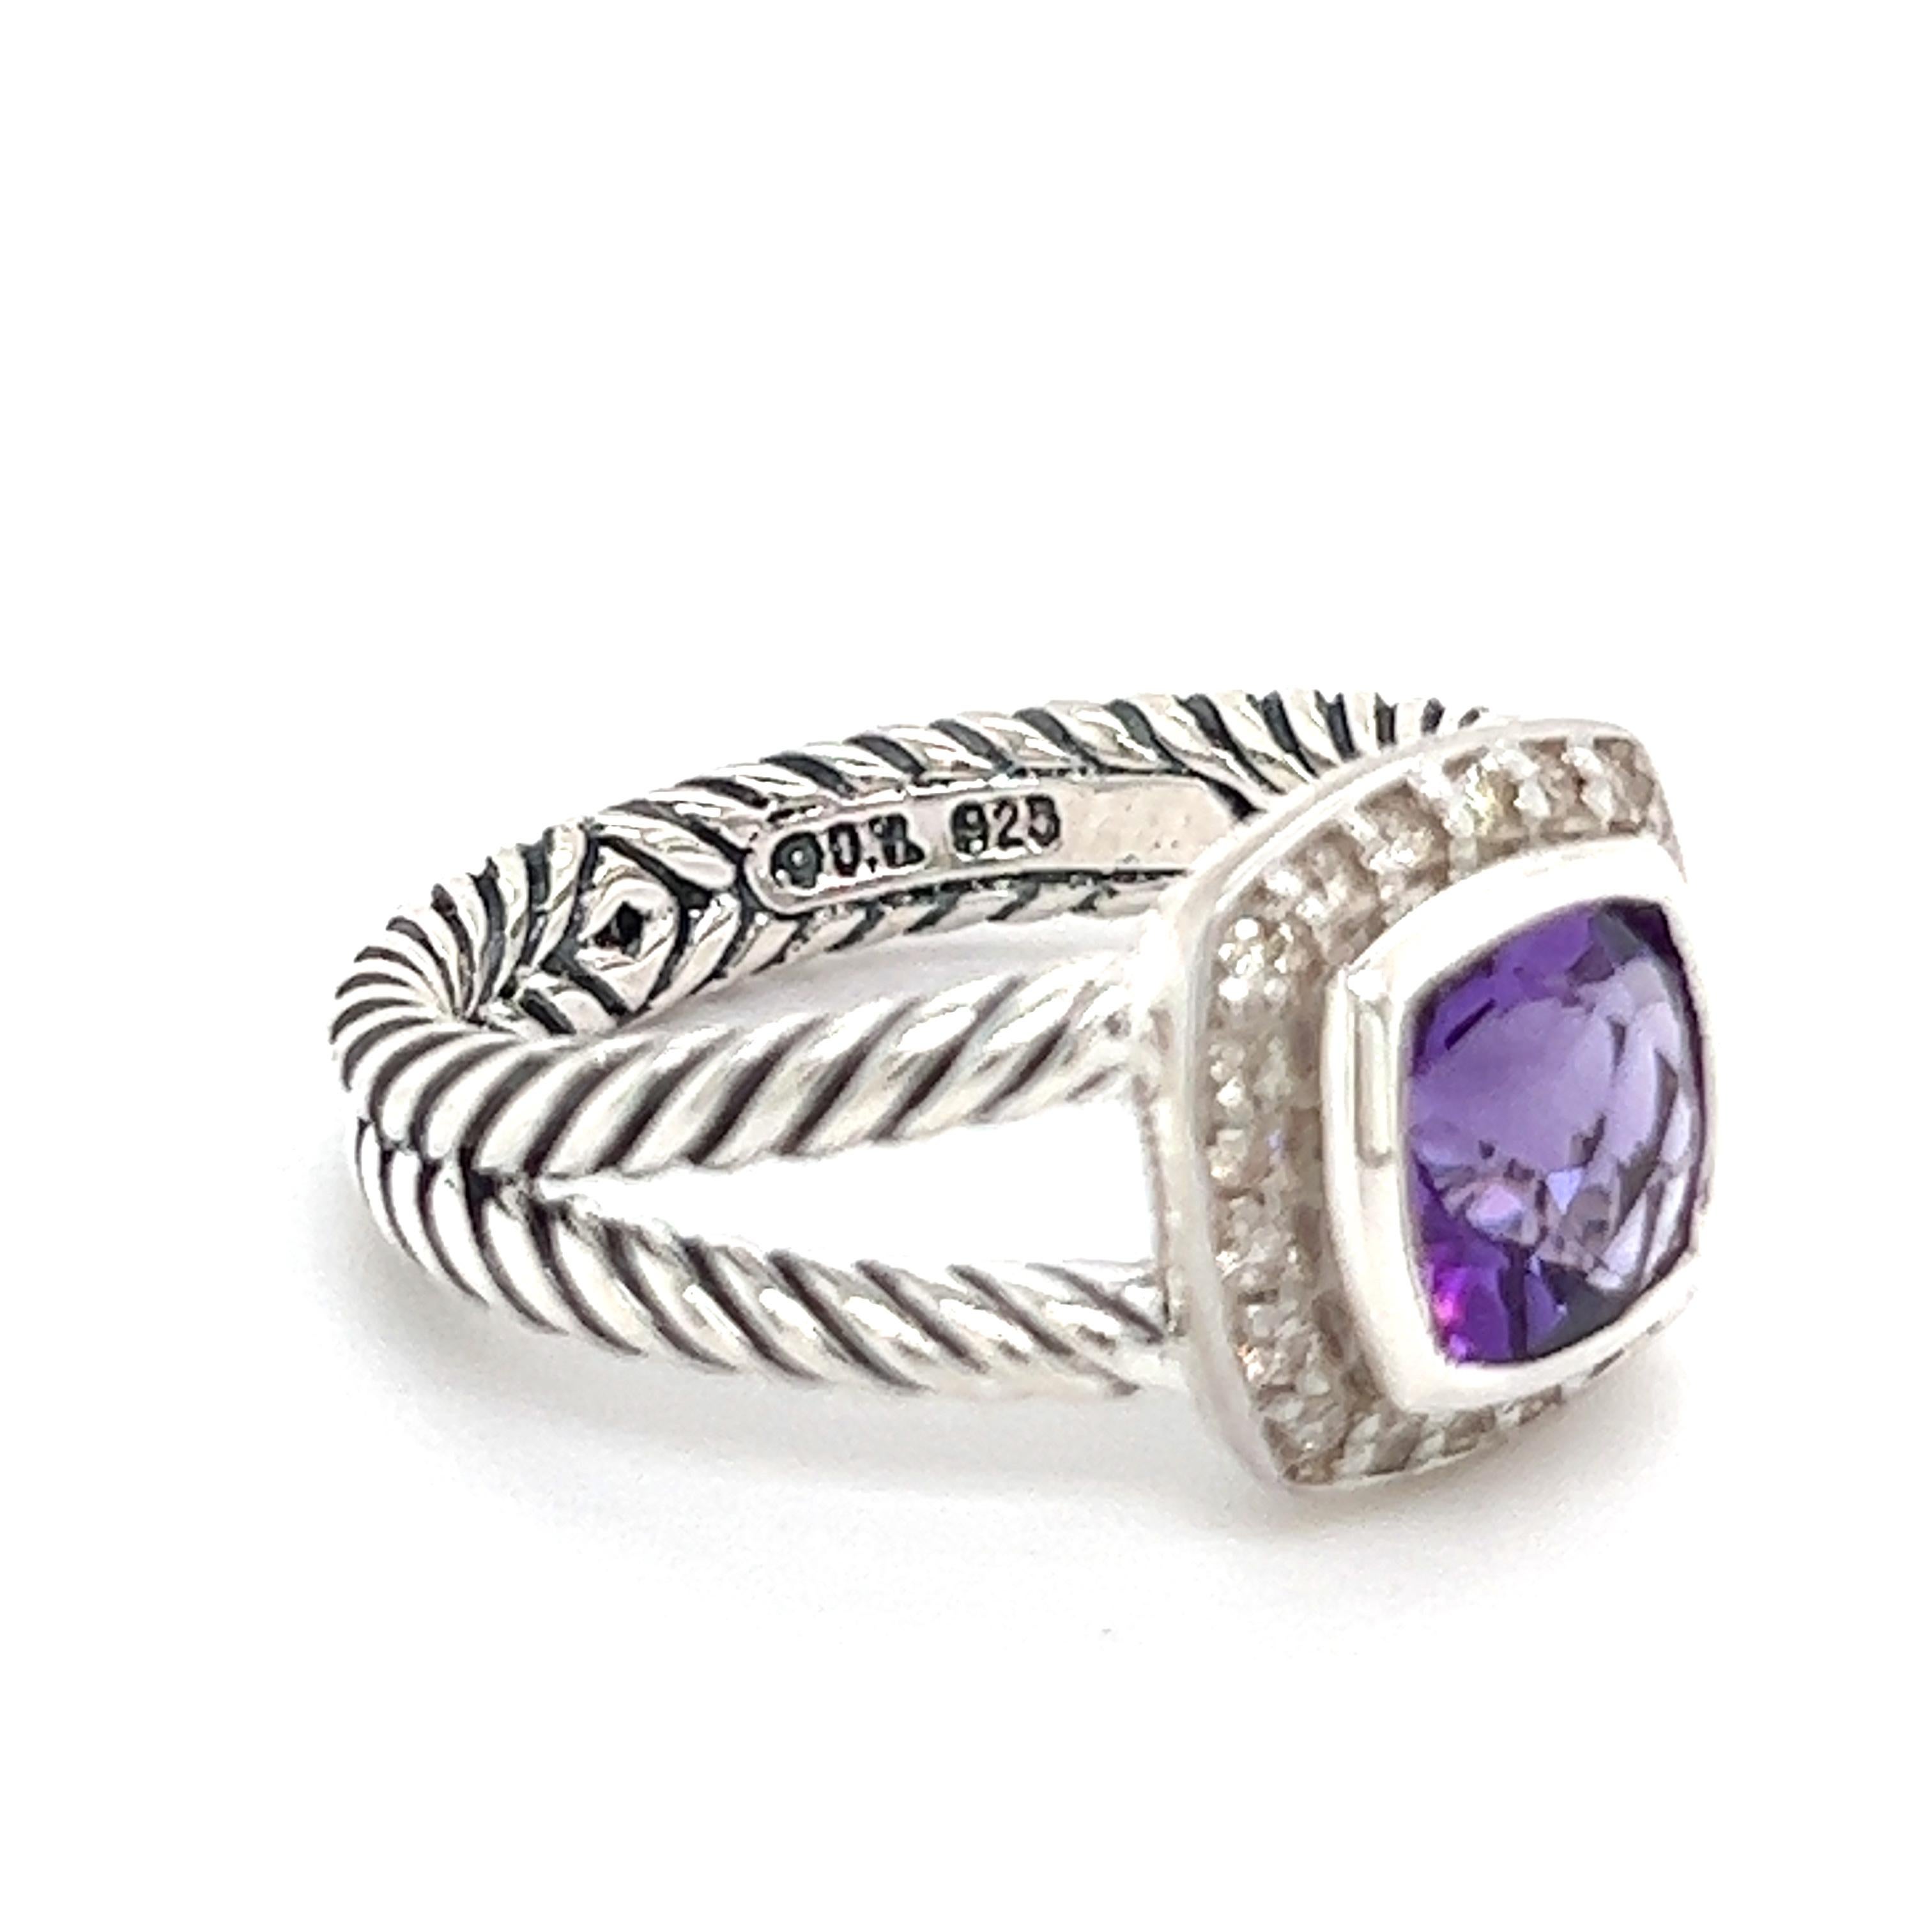 David Yurman Authentic Estate Diamond Petite Albion Amethyst Ring Sil 1.67 TCW In Good Condition For Sale In Brooklyn, NY